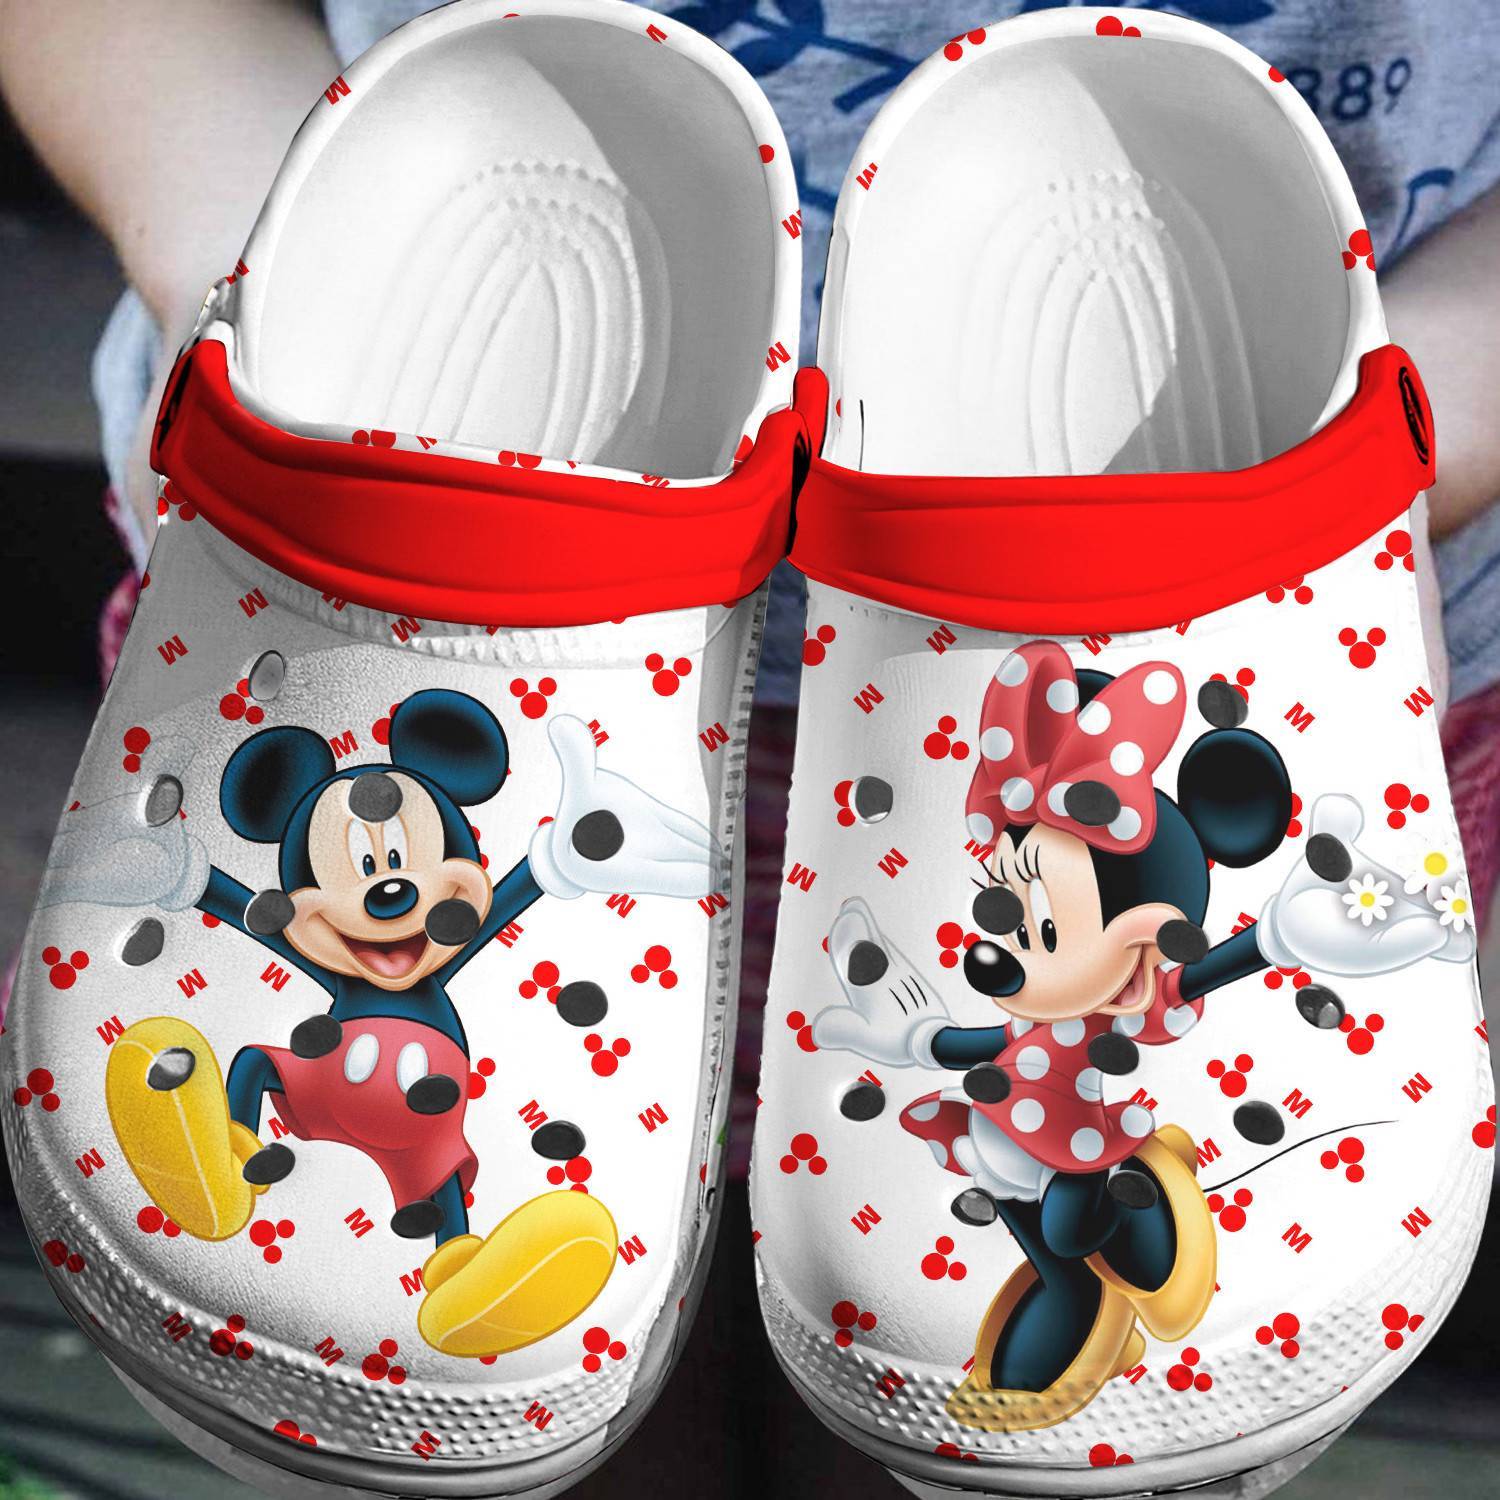 Fun – filled Footwear: Mickey Minnie Crocs 3D Clog Shoes – Perfect for Disney Fans